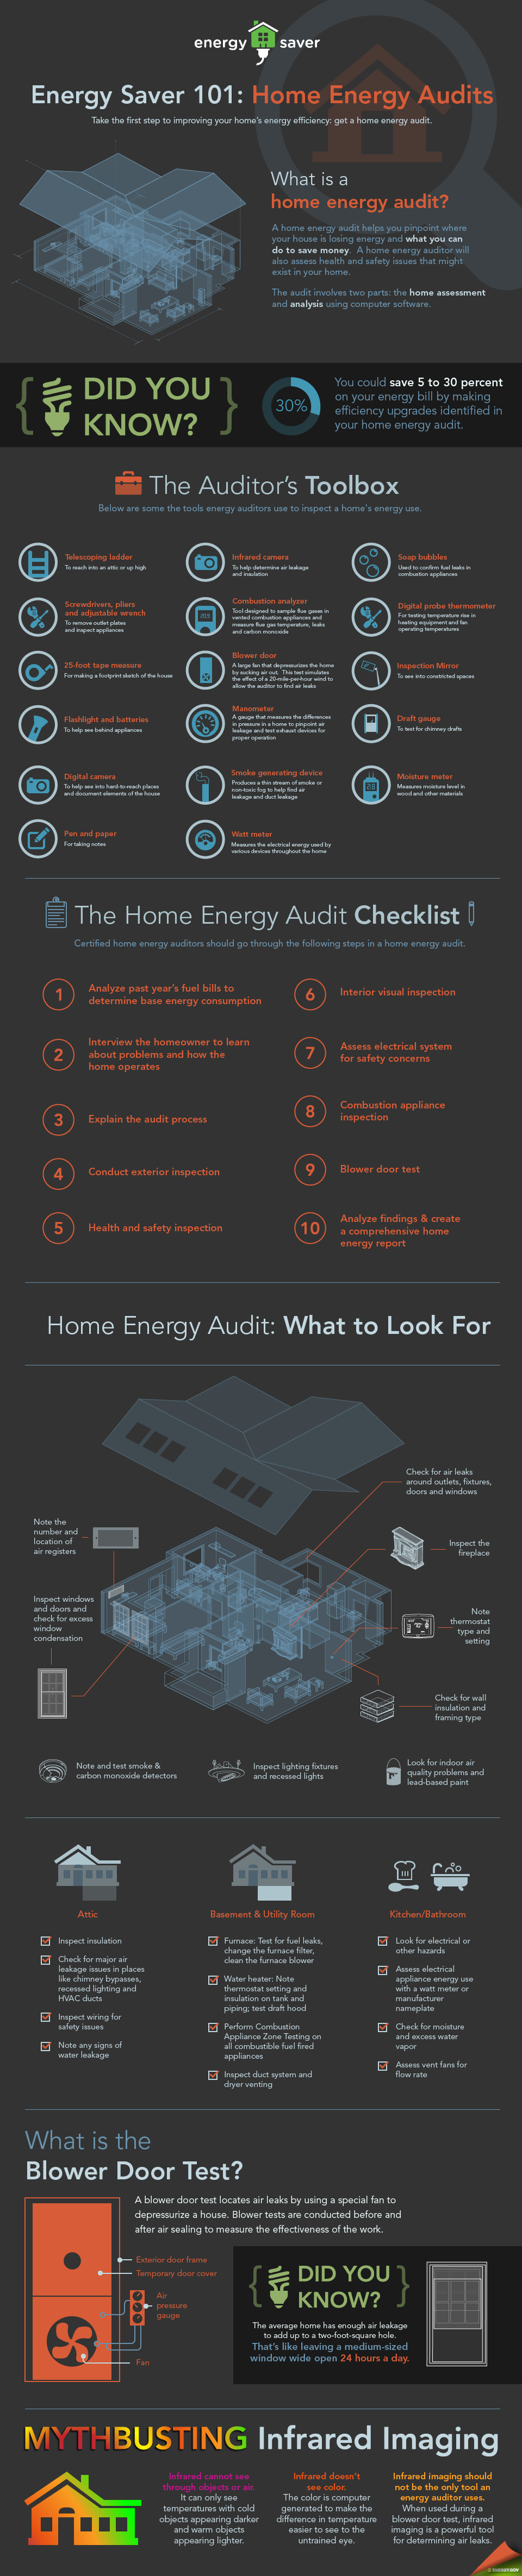 Home energy audit infographic